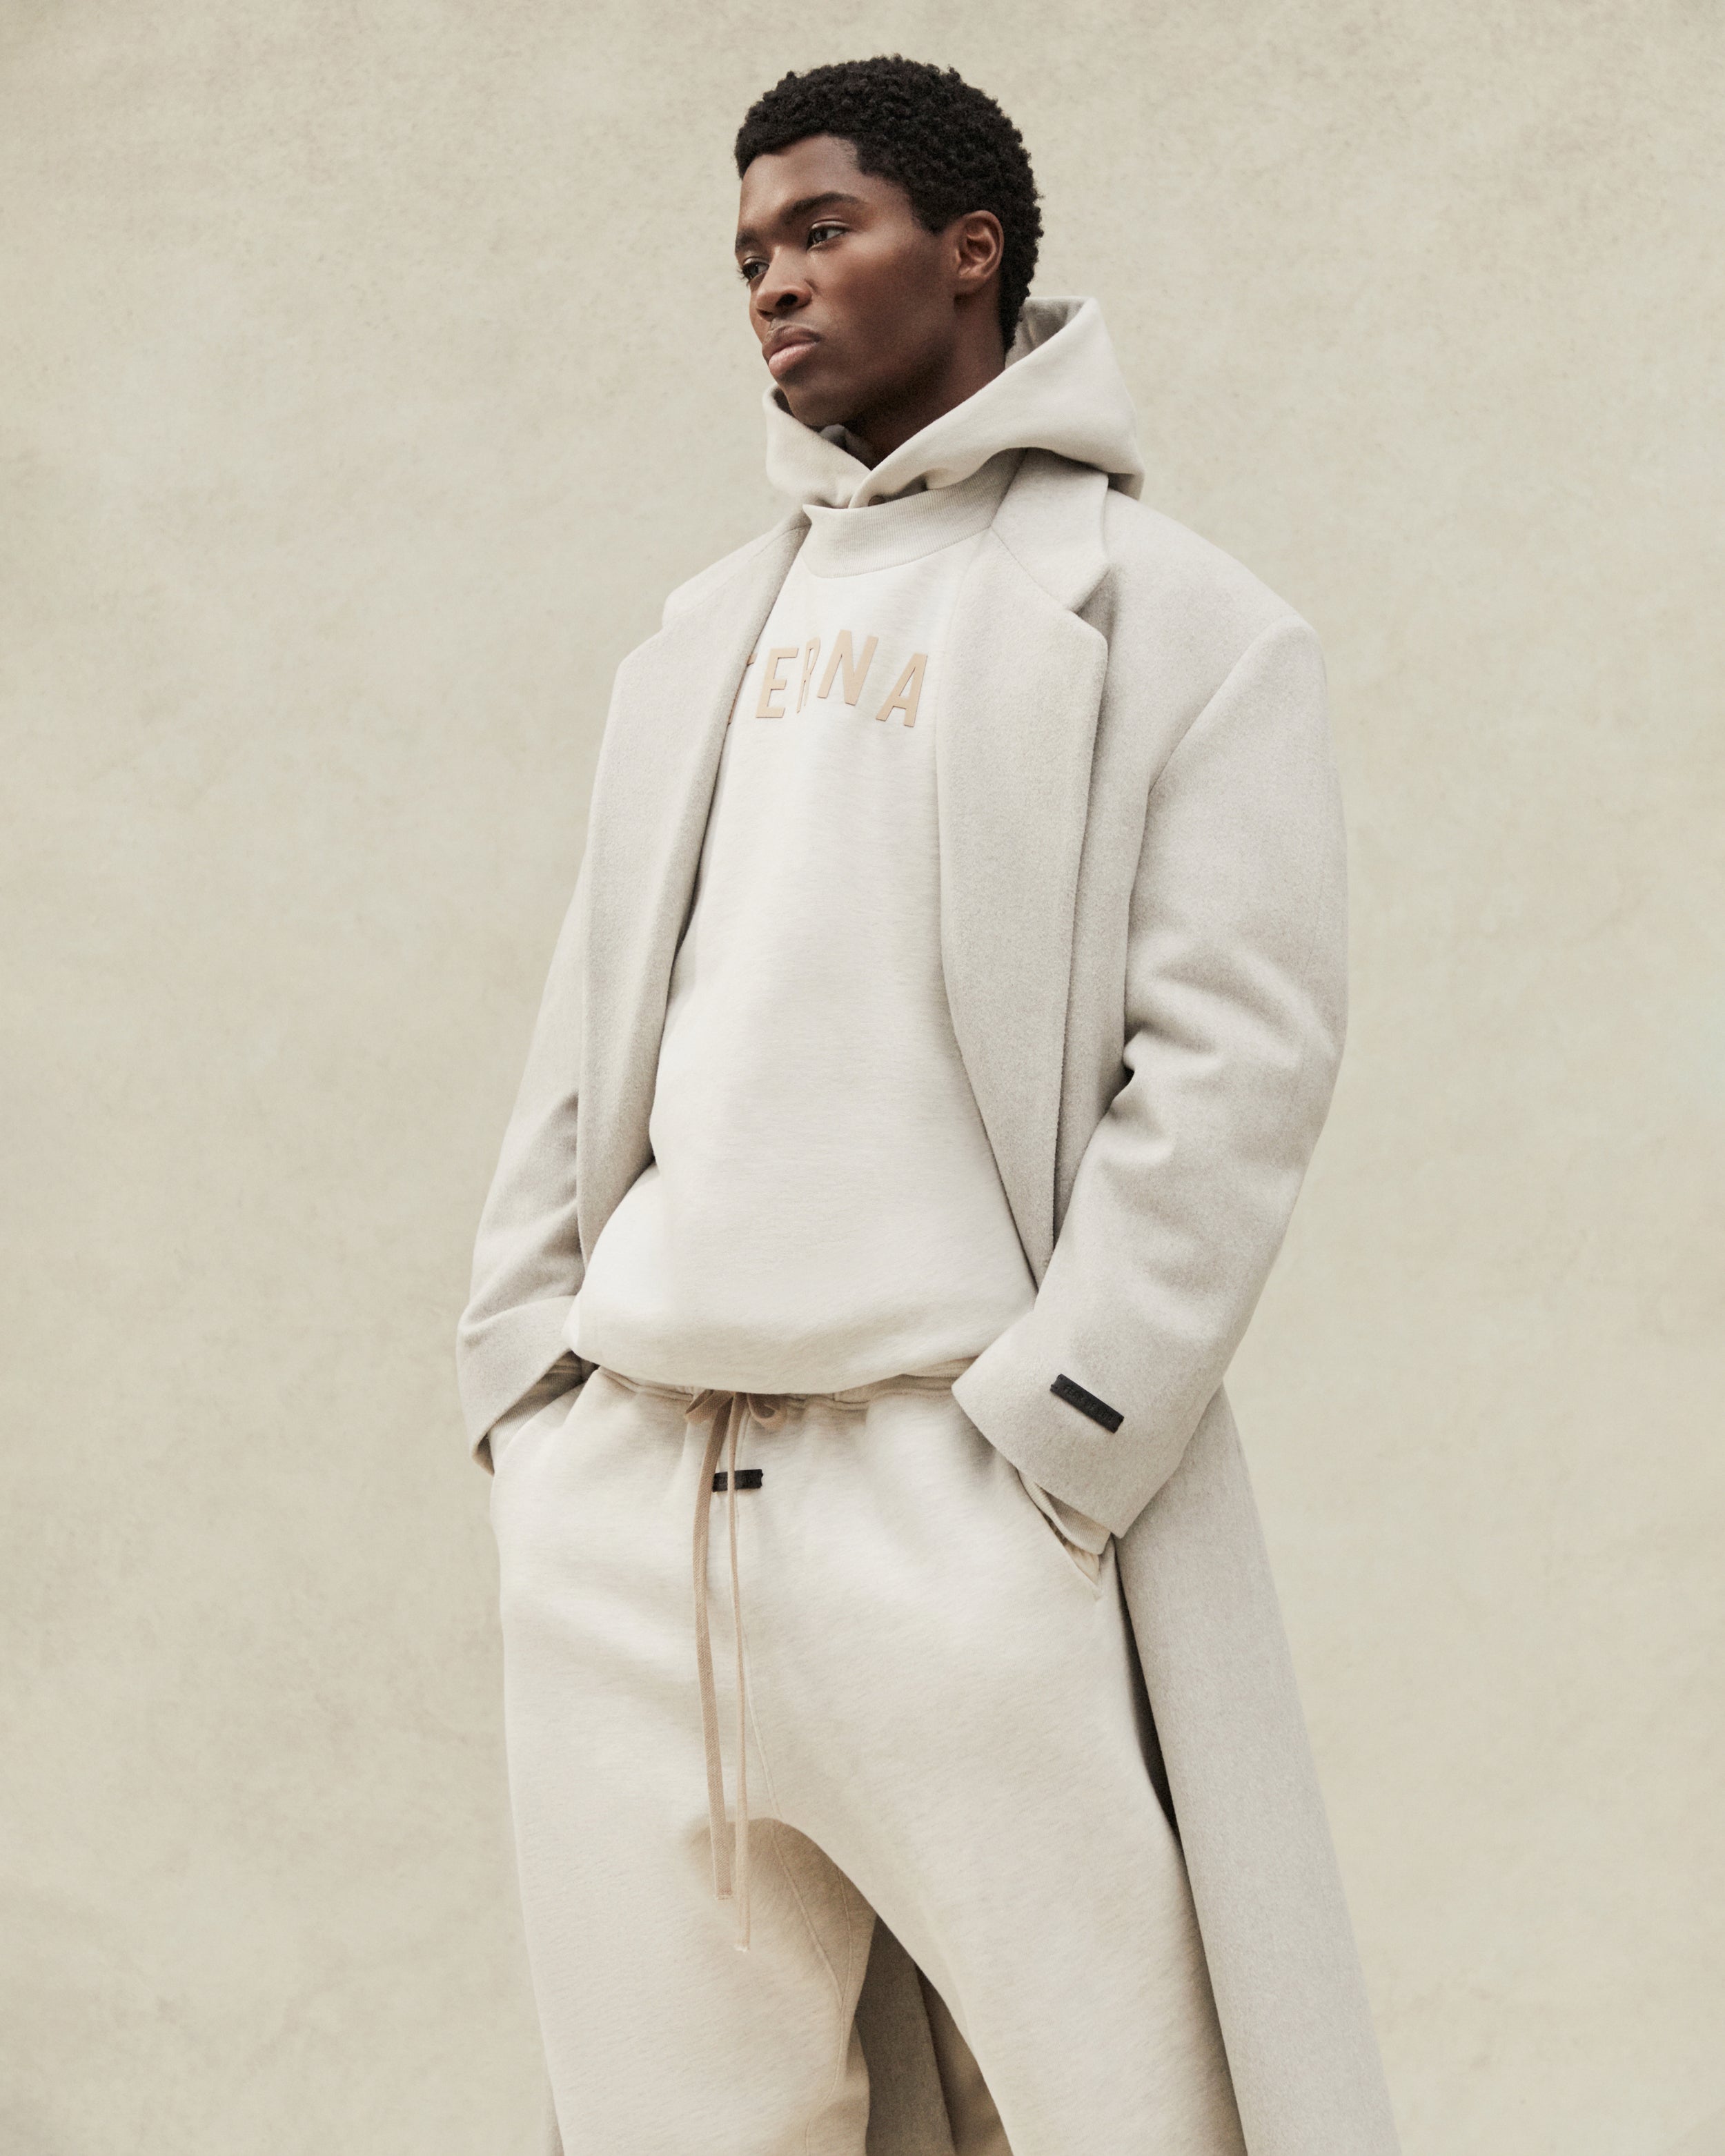 FEAR OF GOD THE ETERNAL COLLECTION